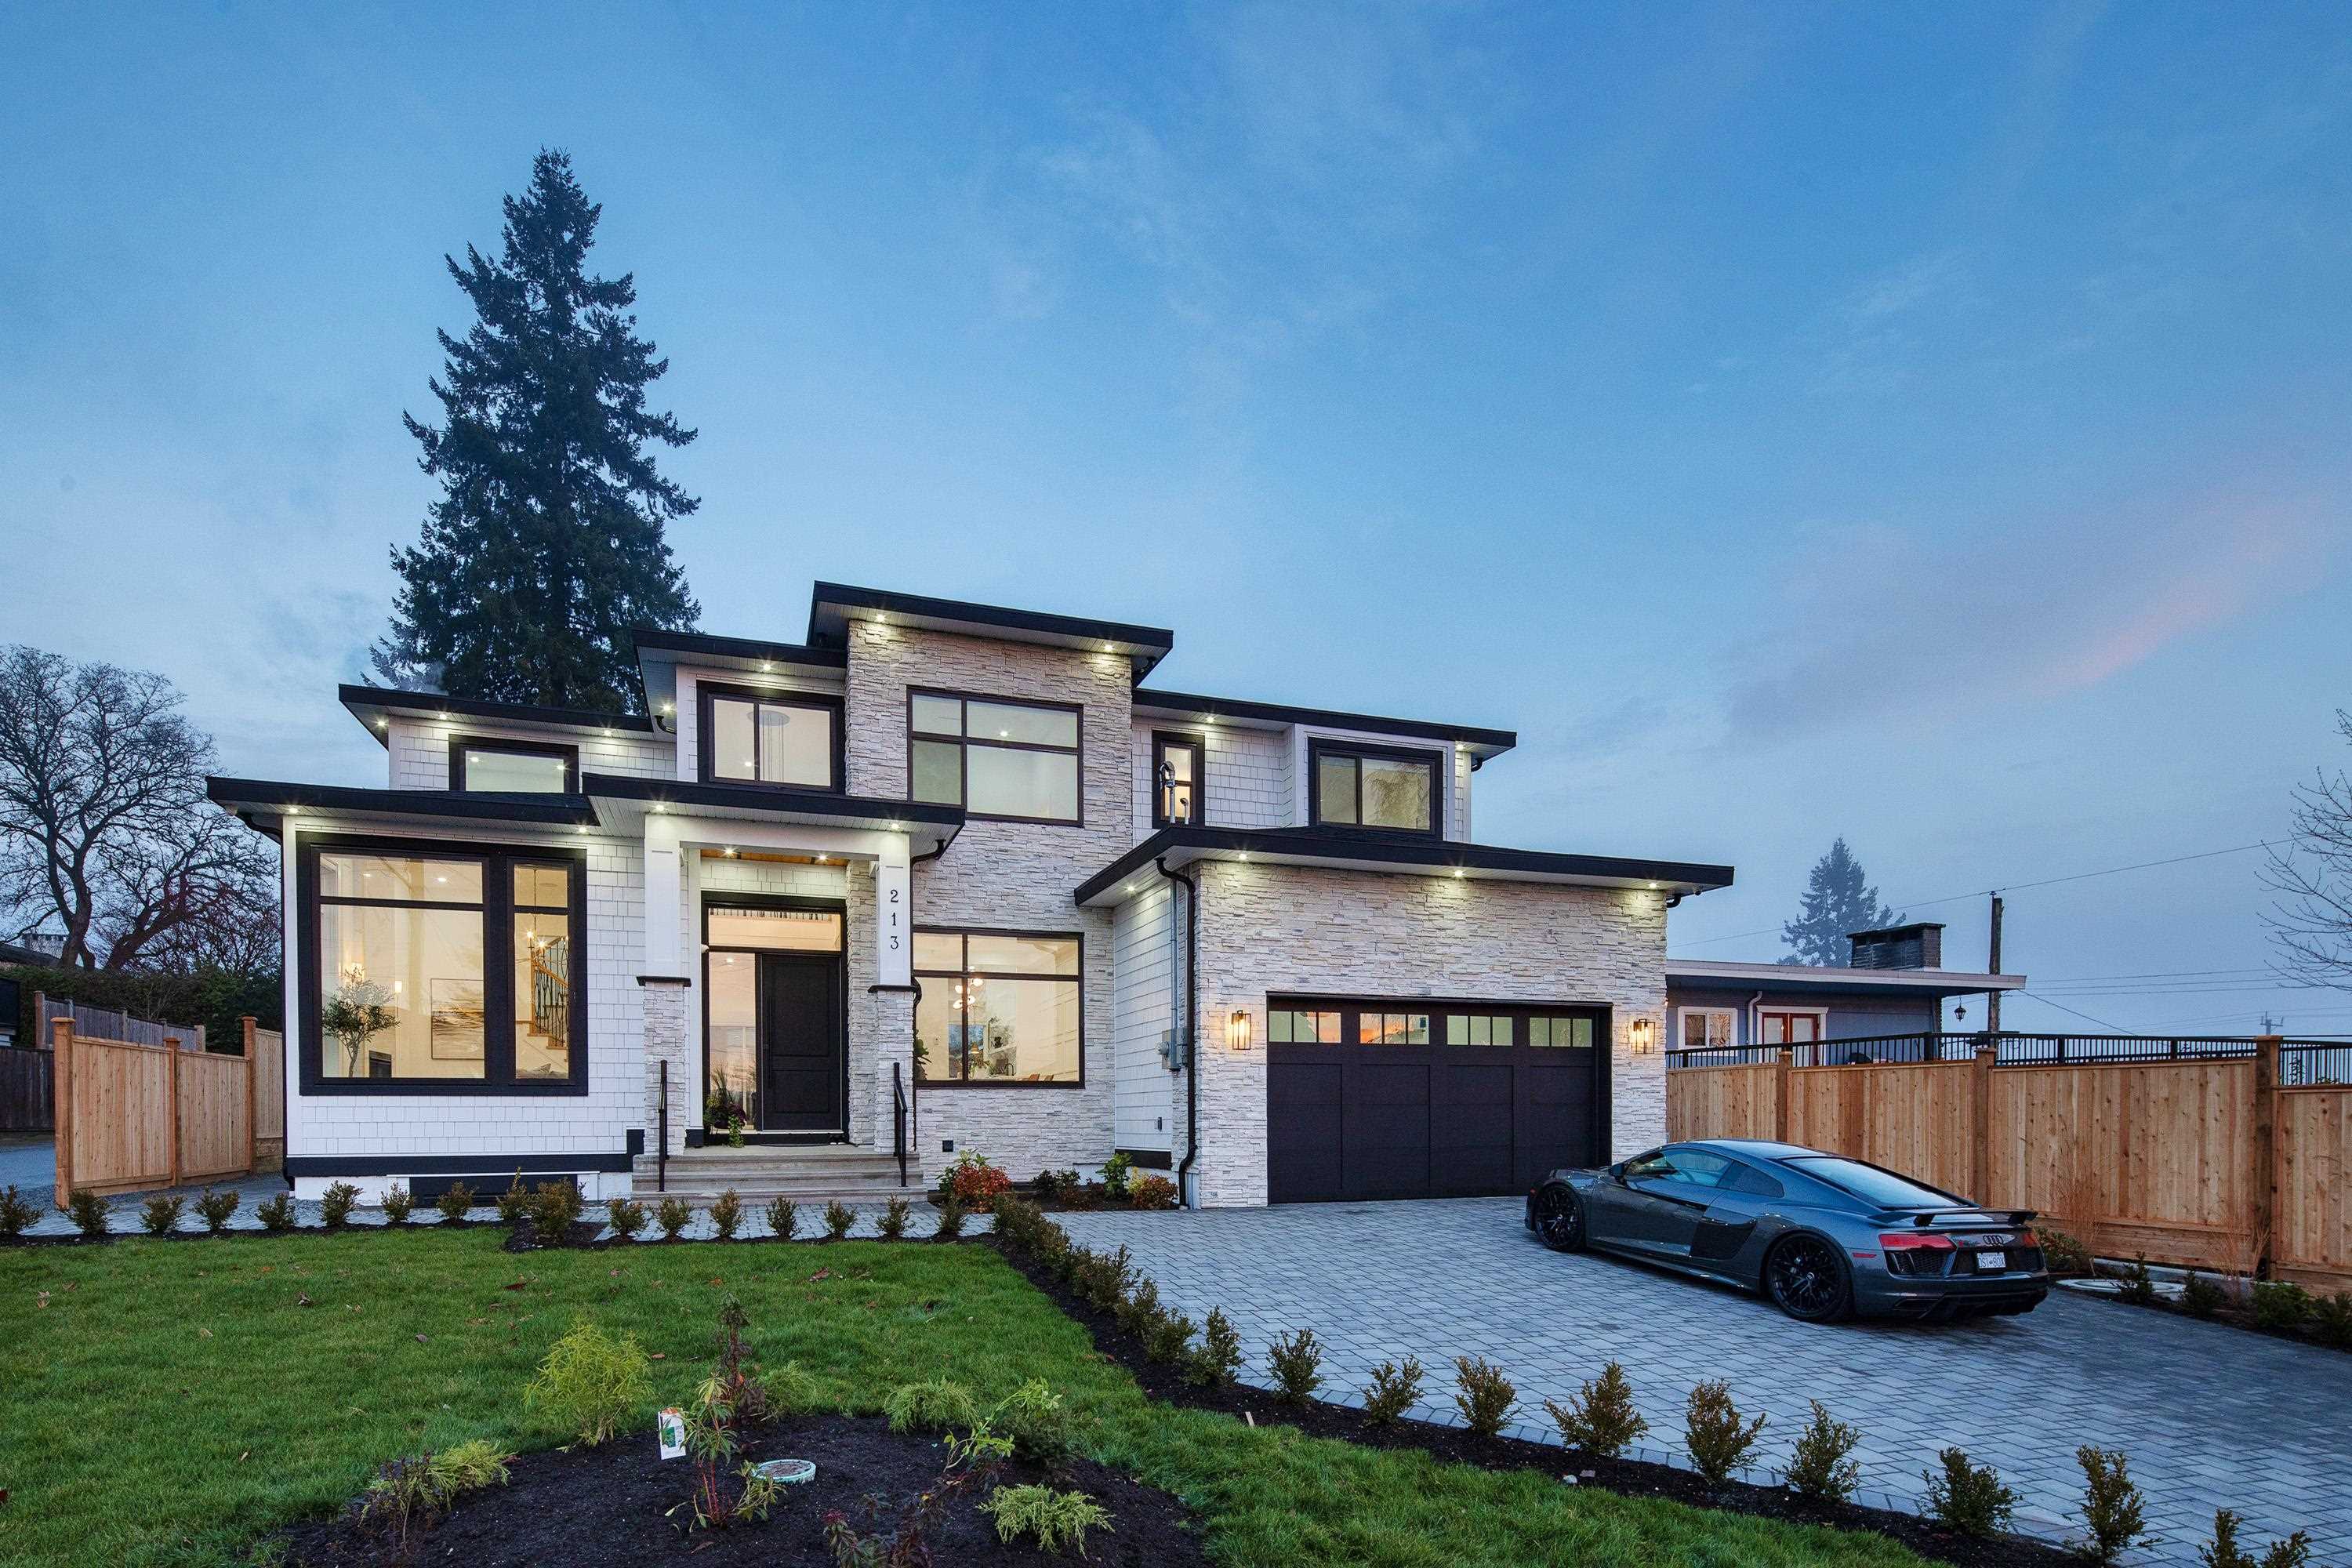 Central Coquitlam House/Single Family for sale:  9 bedroom 5,551 sq.ft. (Listed 2106-02-06)